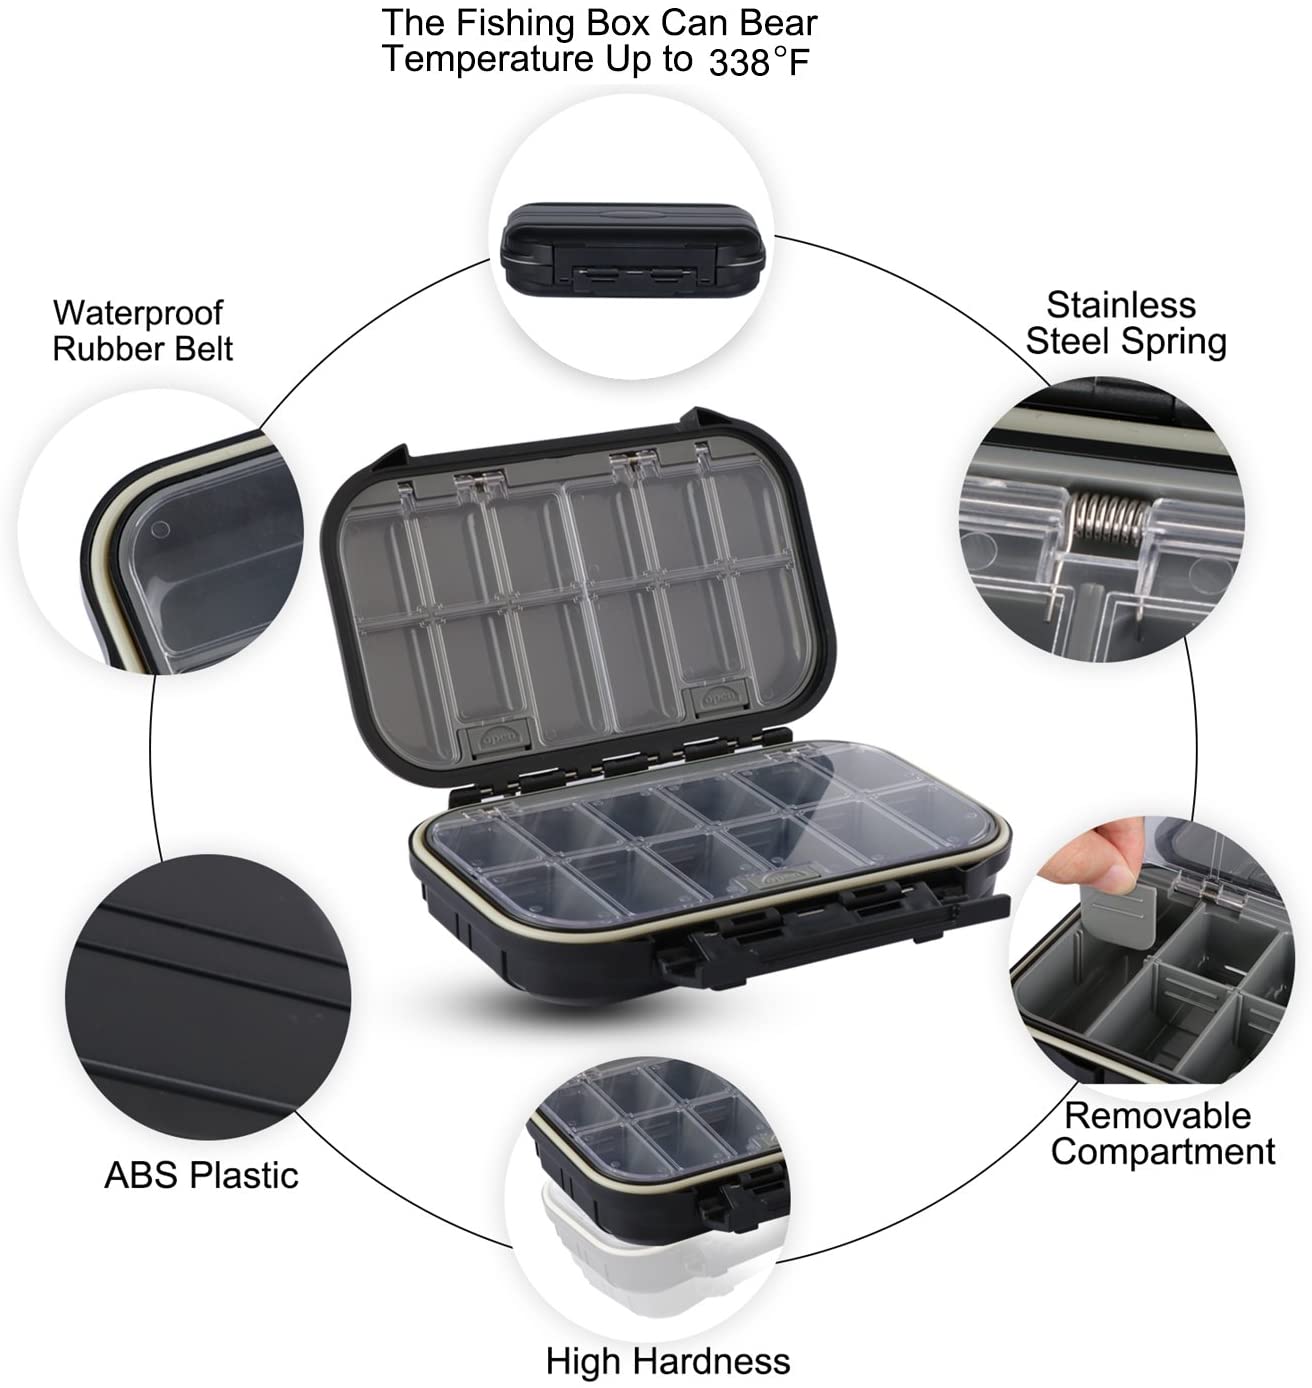  Goture 2 Pcs 3600 Tackle Trays, Waterproof Tackle Box,  Waterproof Floating Airtight Stowaway, 3600 Tray with Adjustable Dividers,  Sun Protection, Fishing Storage Lure Box for Freshwater Saltwater : Sports  & Outdoors